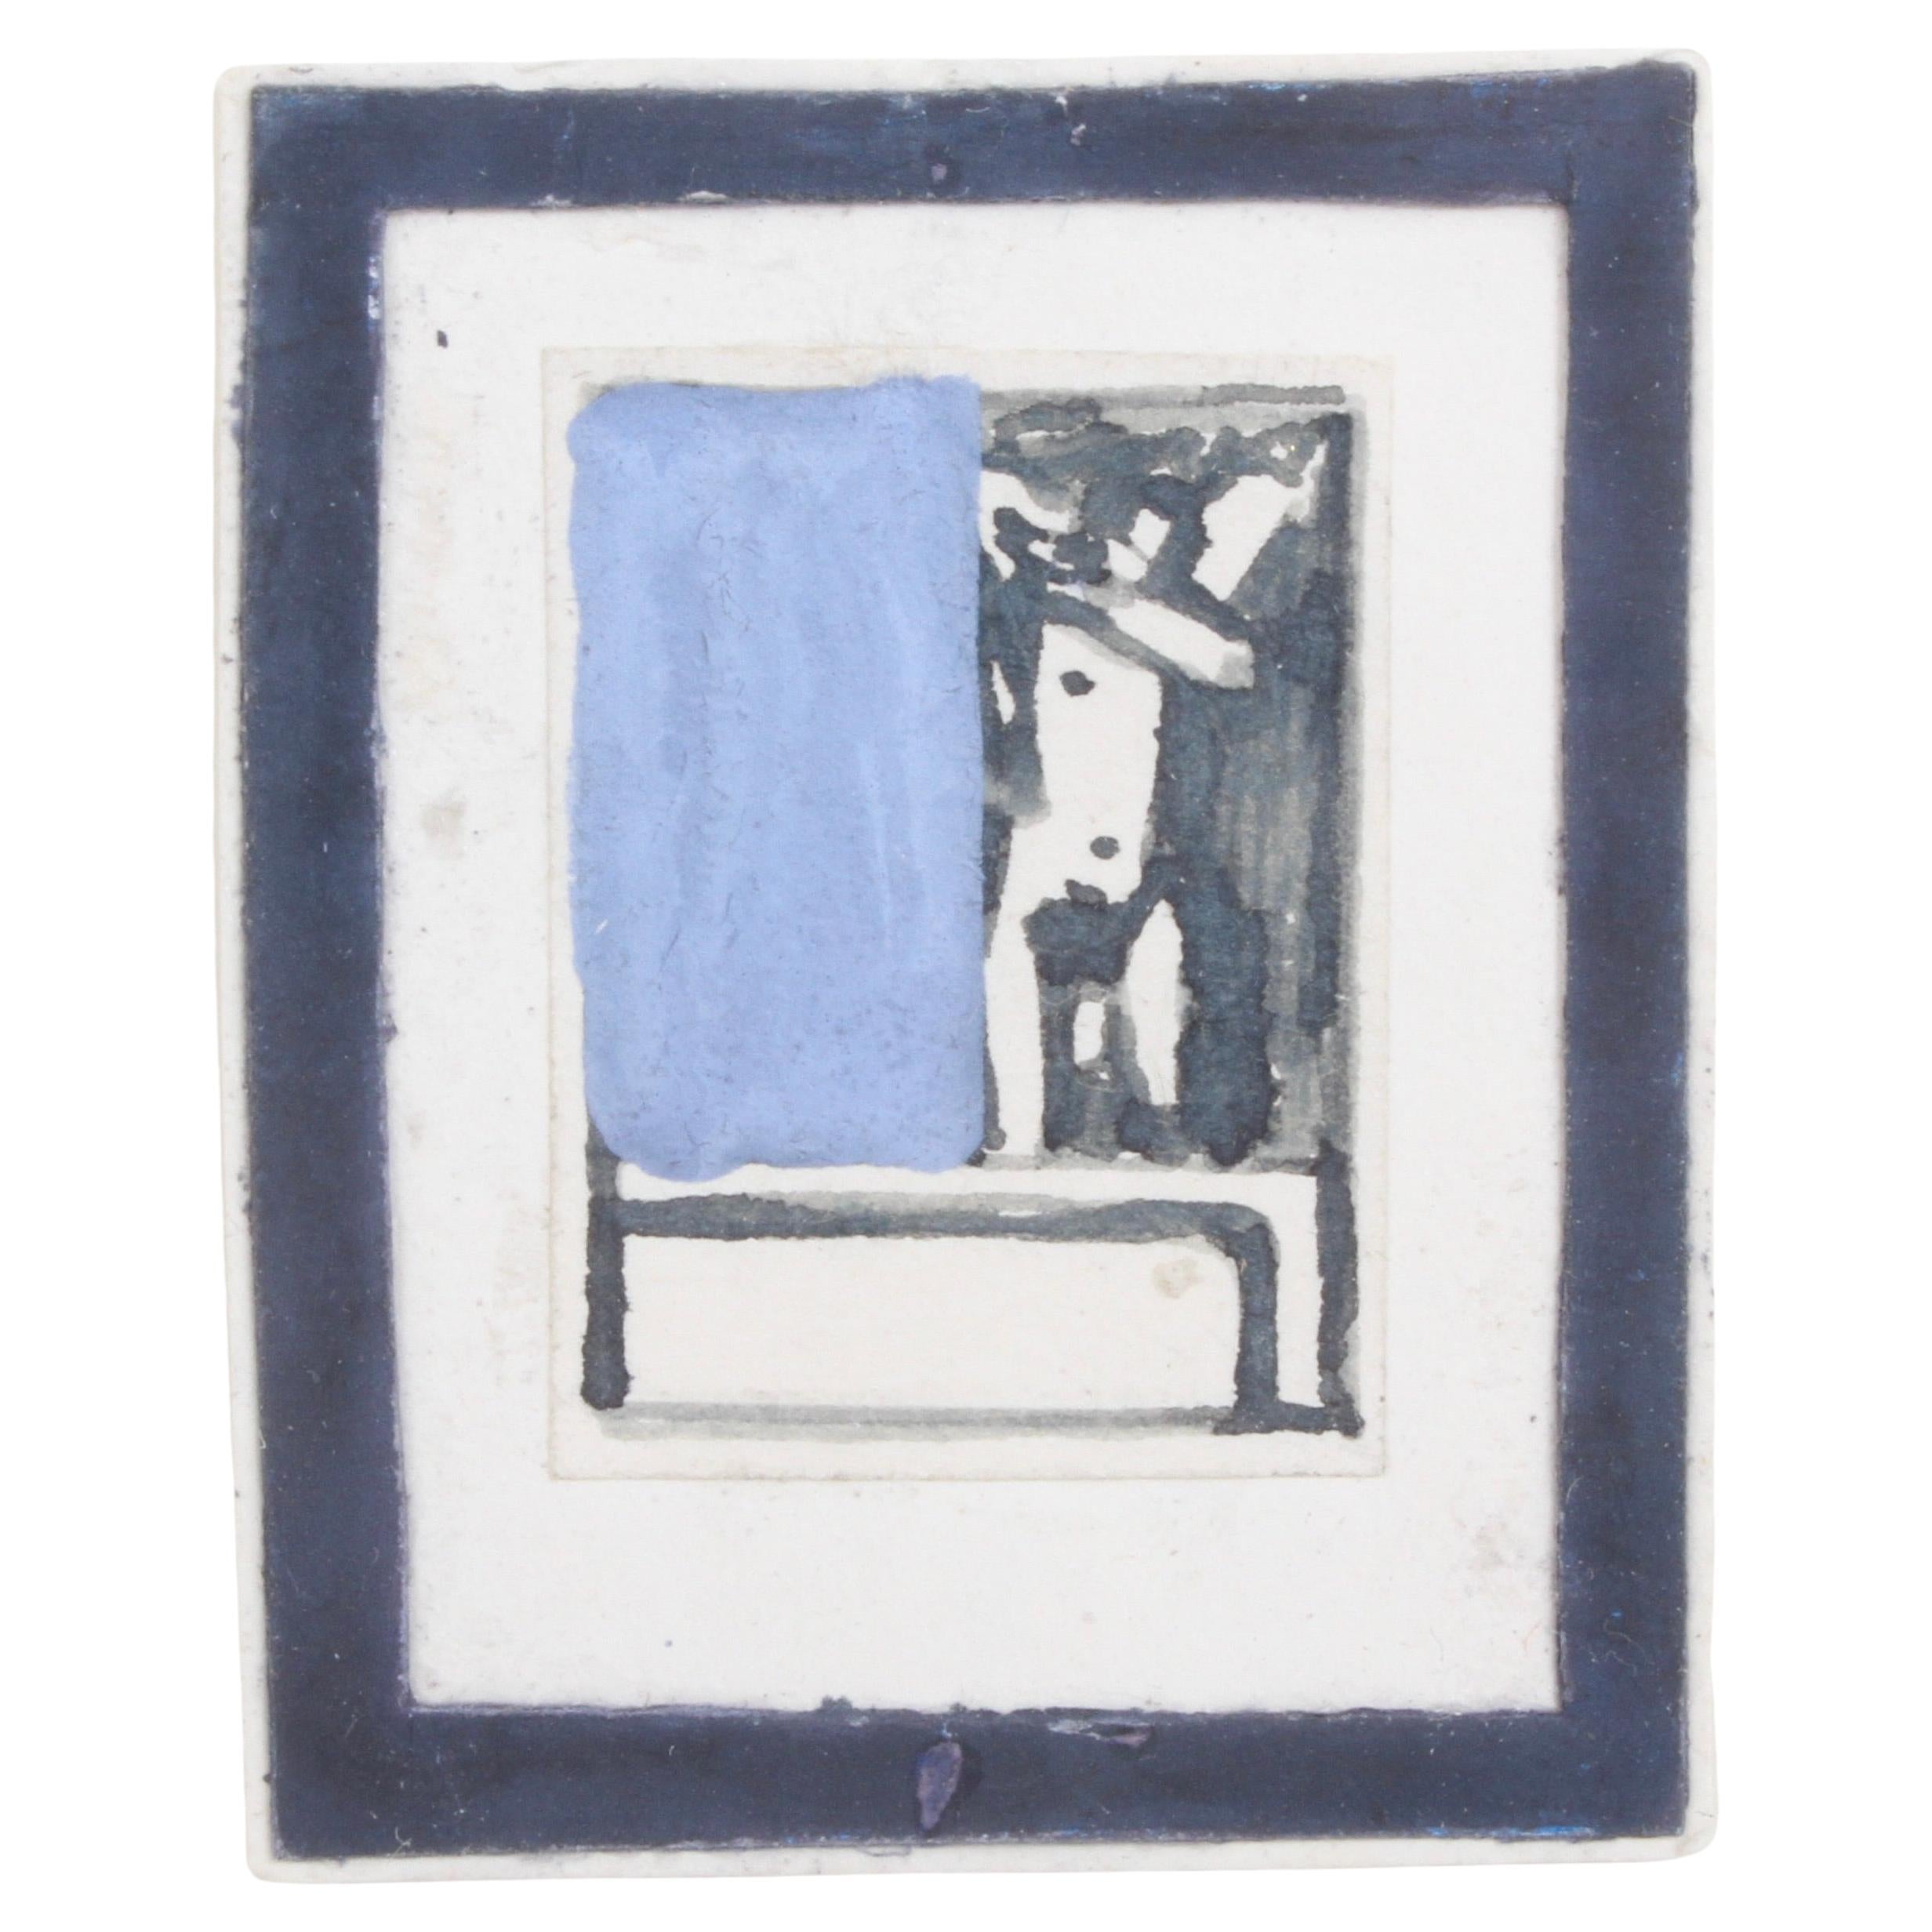 Joe Brainard Untitled - Nude Male in Shower - Matchbook Cover Art Series - 1970s For Sale